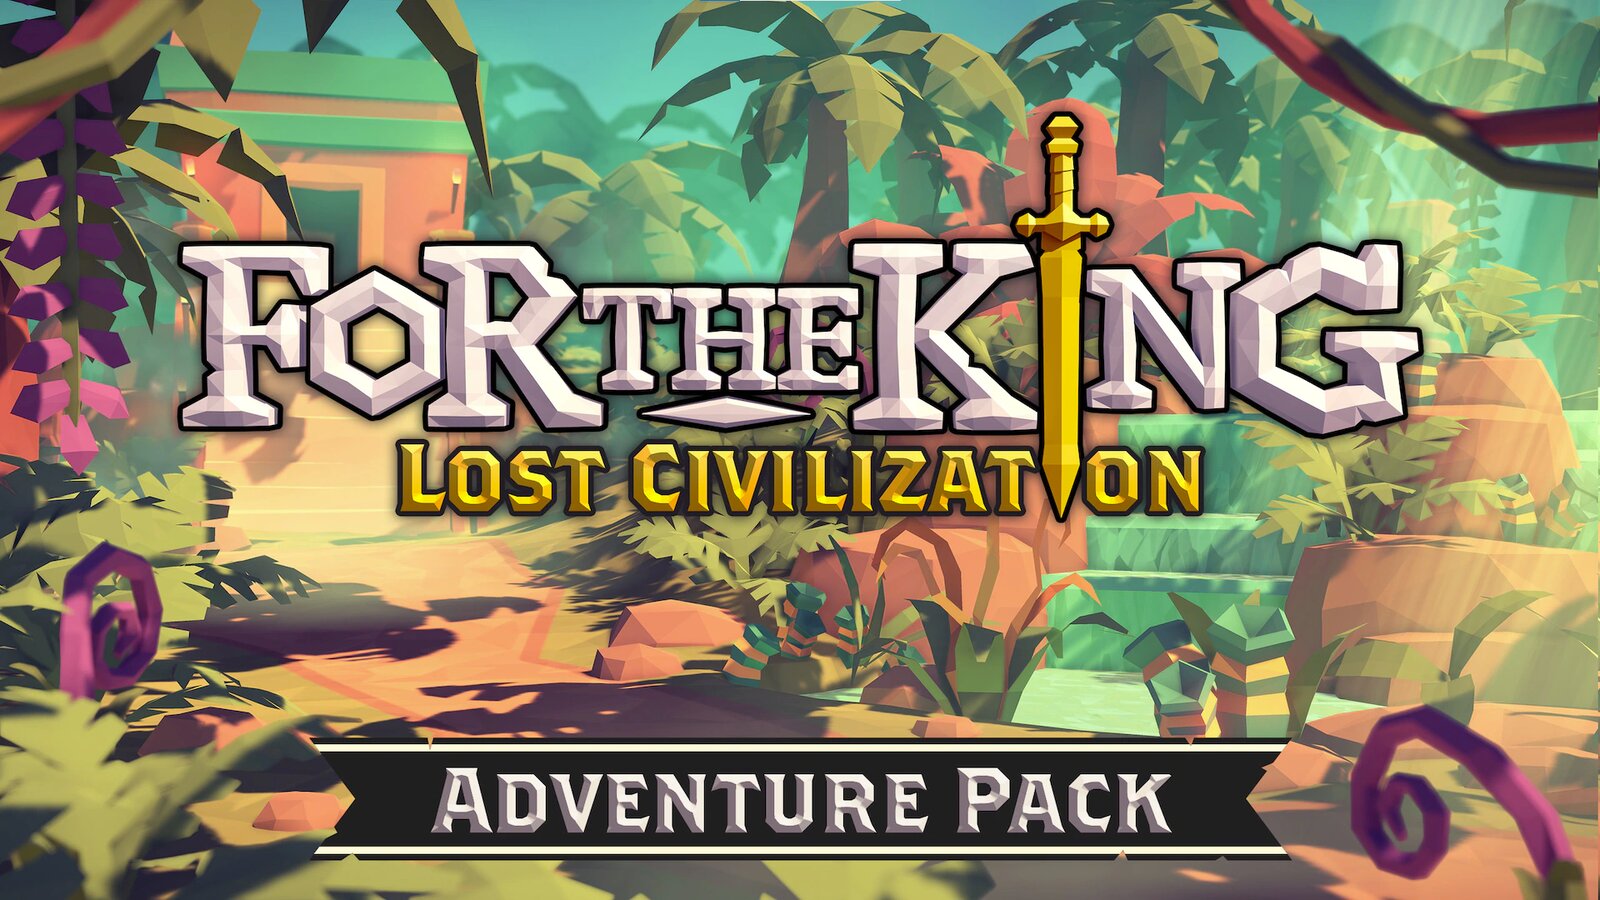 For the King - Lost Civilization Adventure Pack